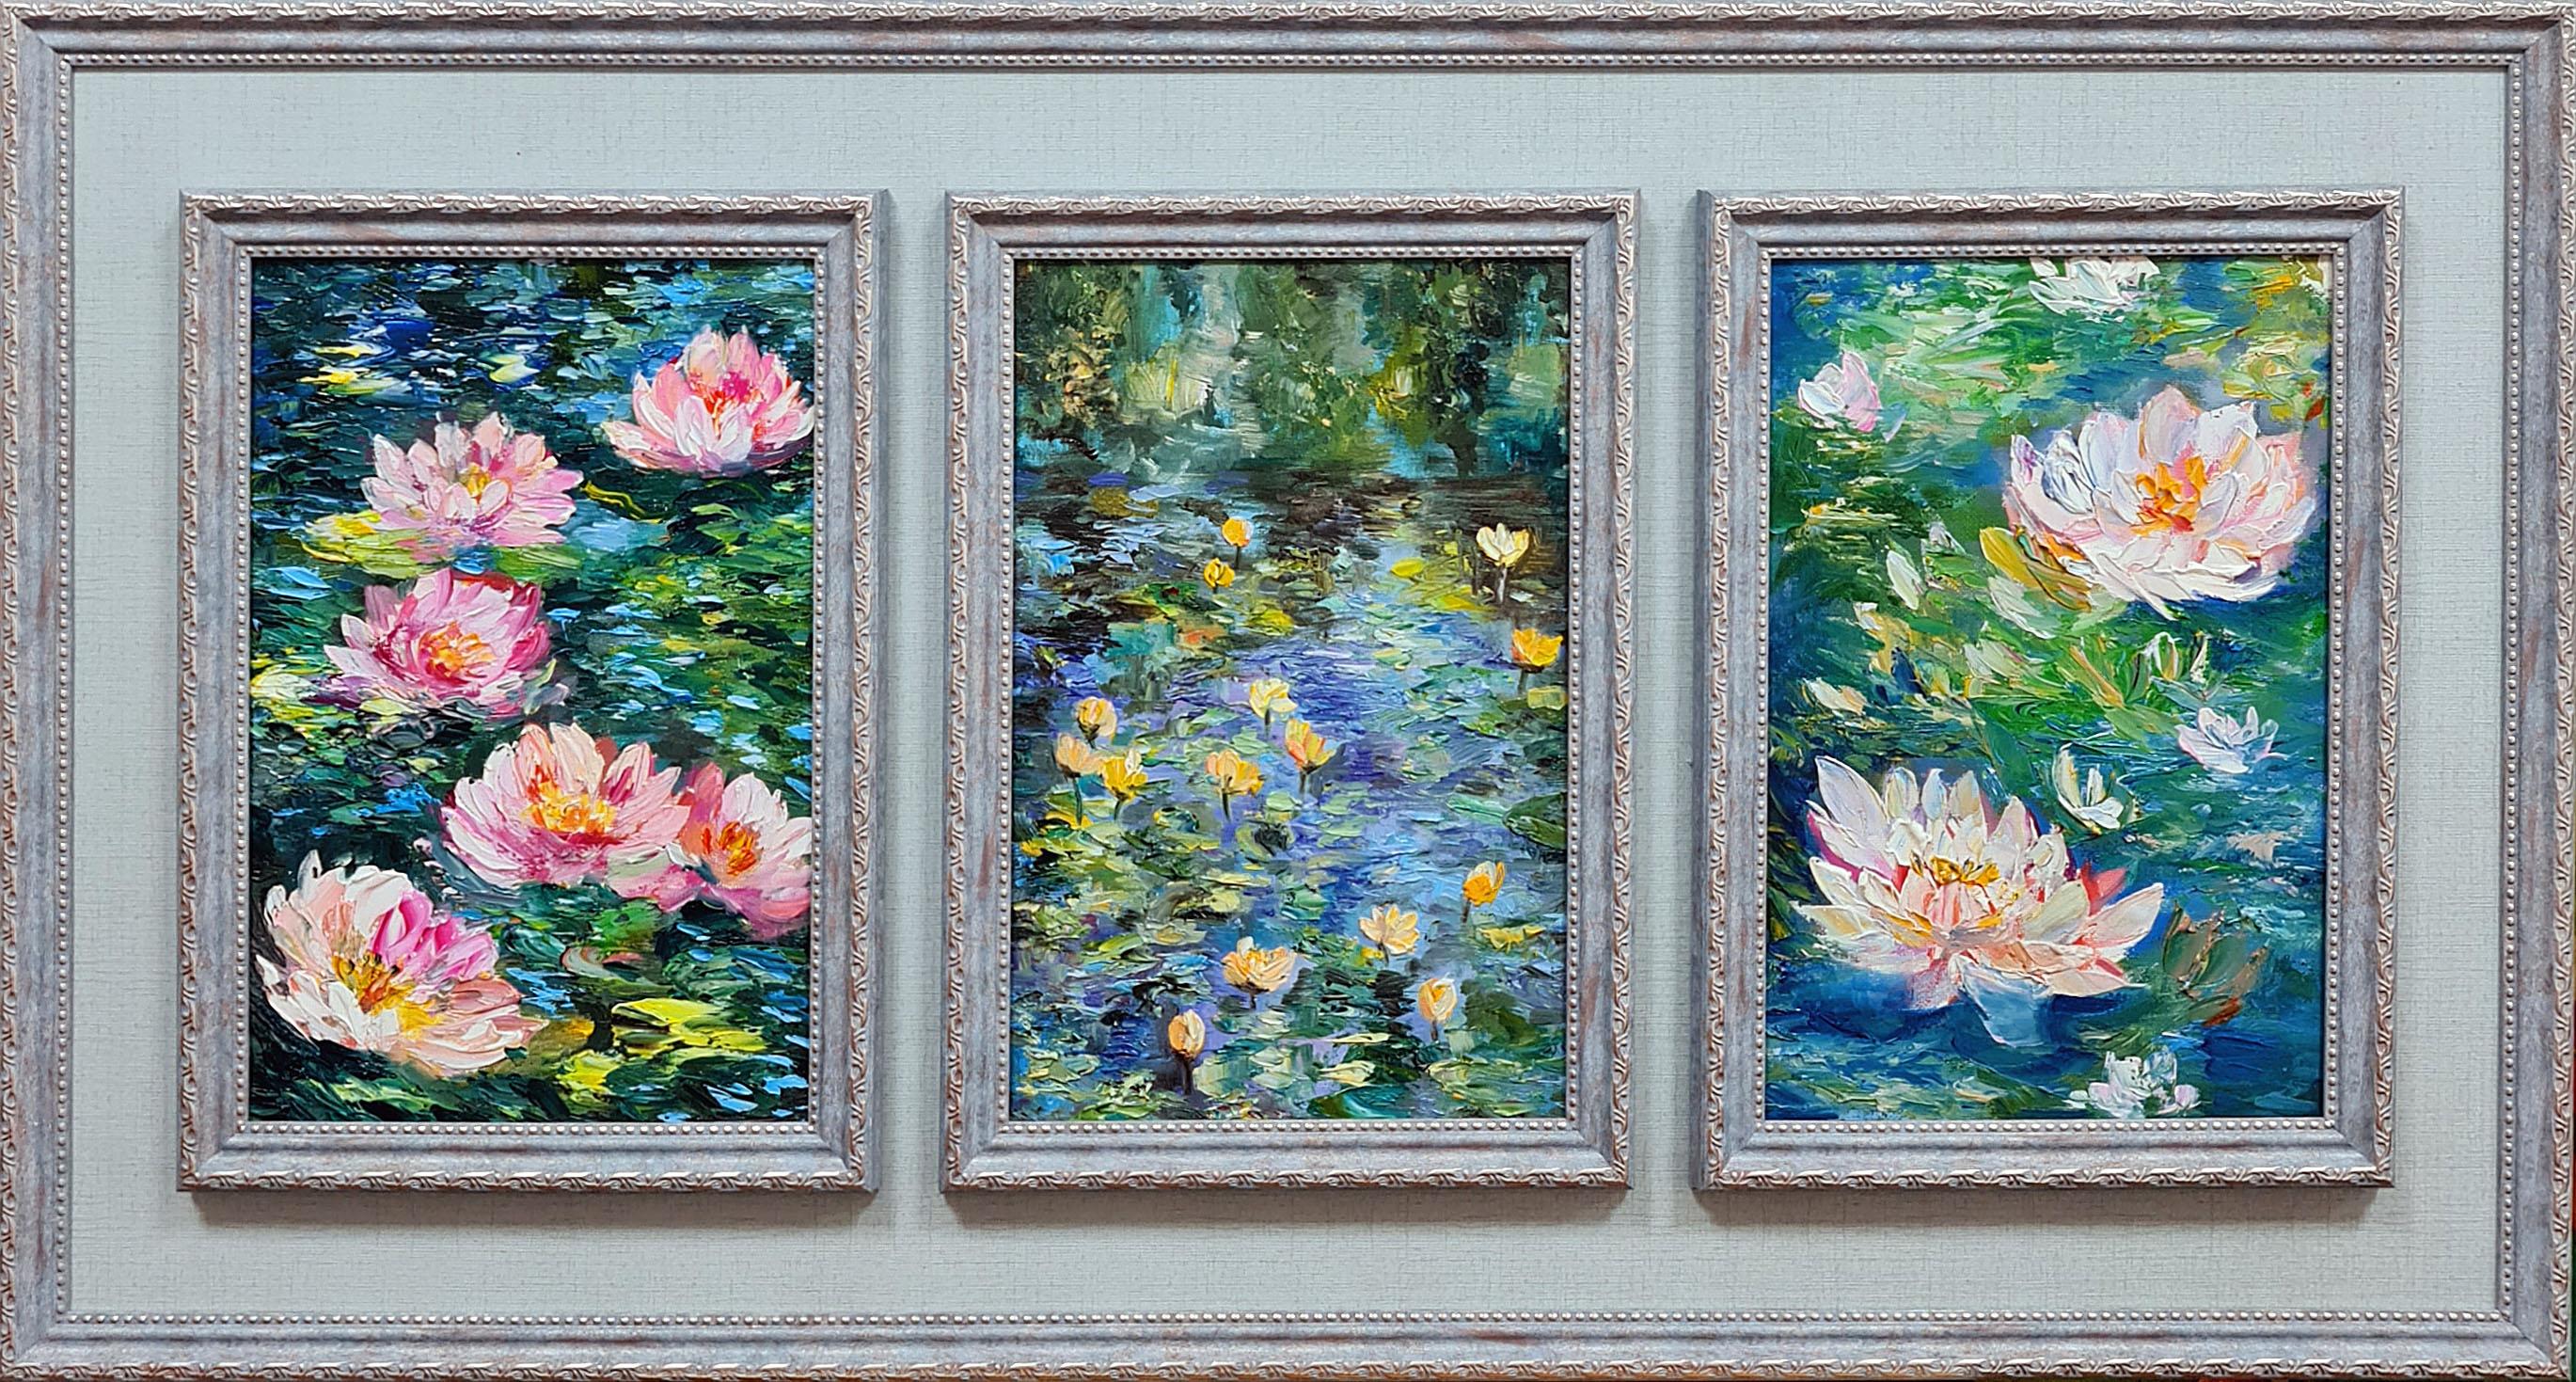 Lilies and water lilies. A shady pond. A Monet-style triptych.